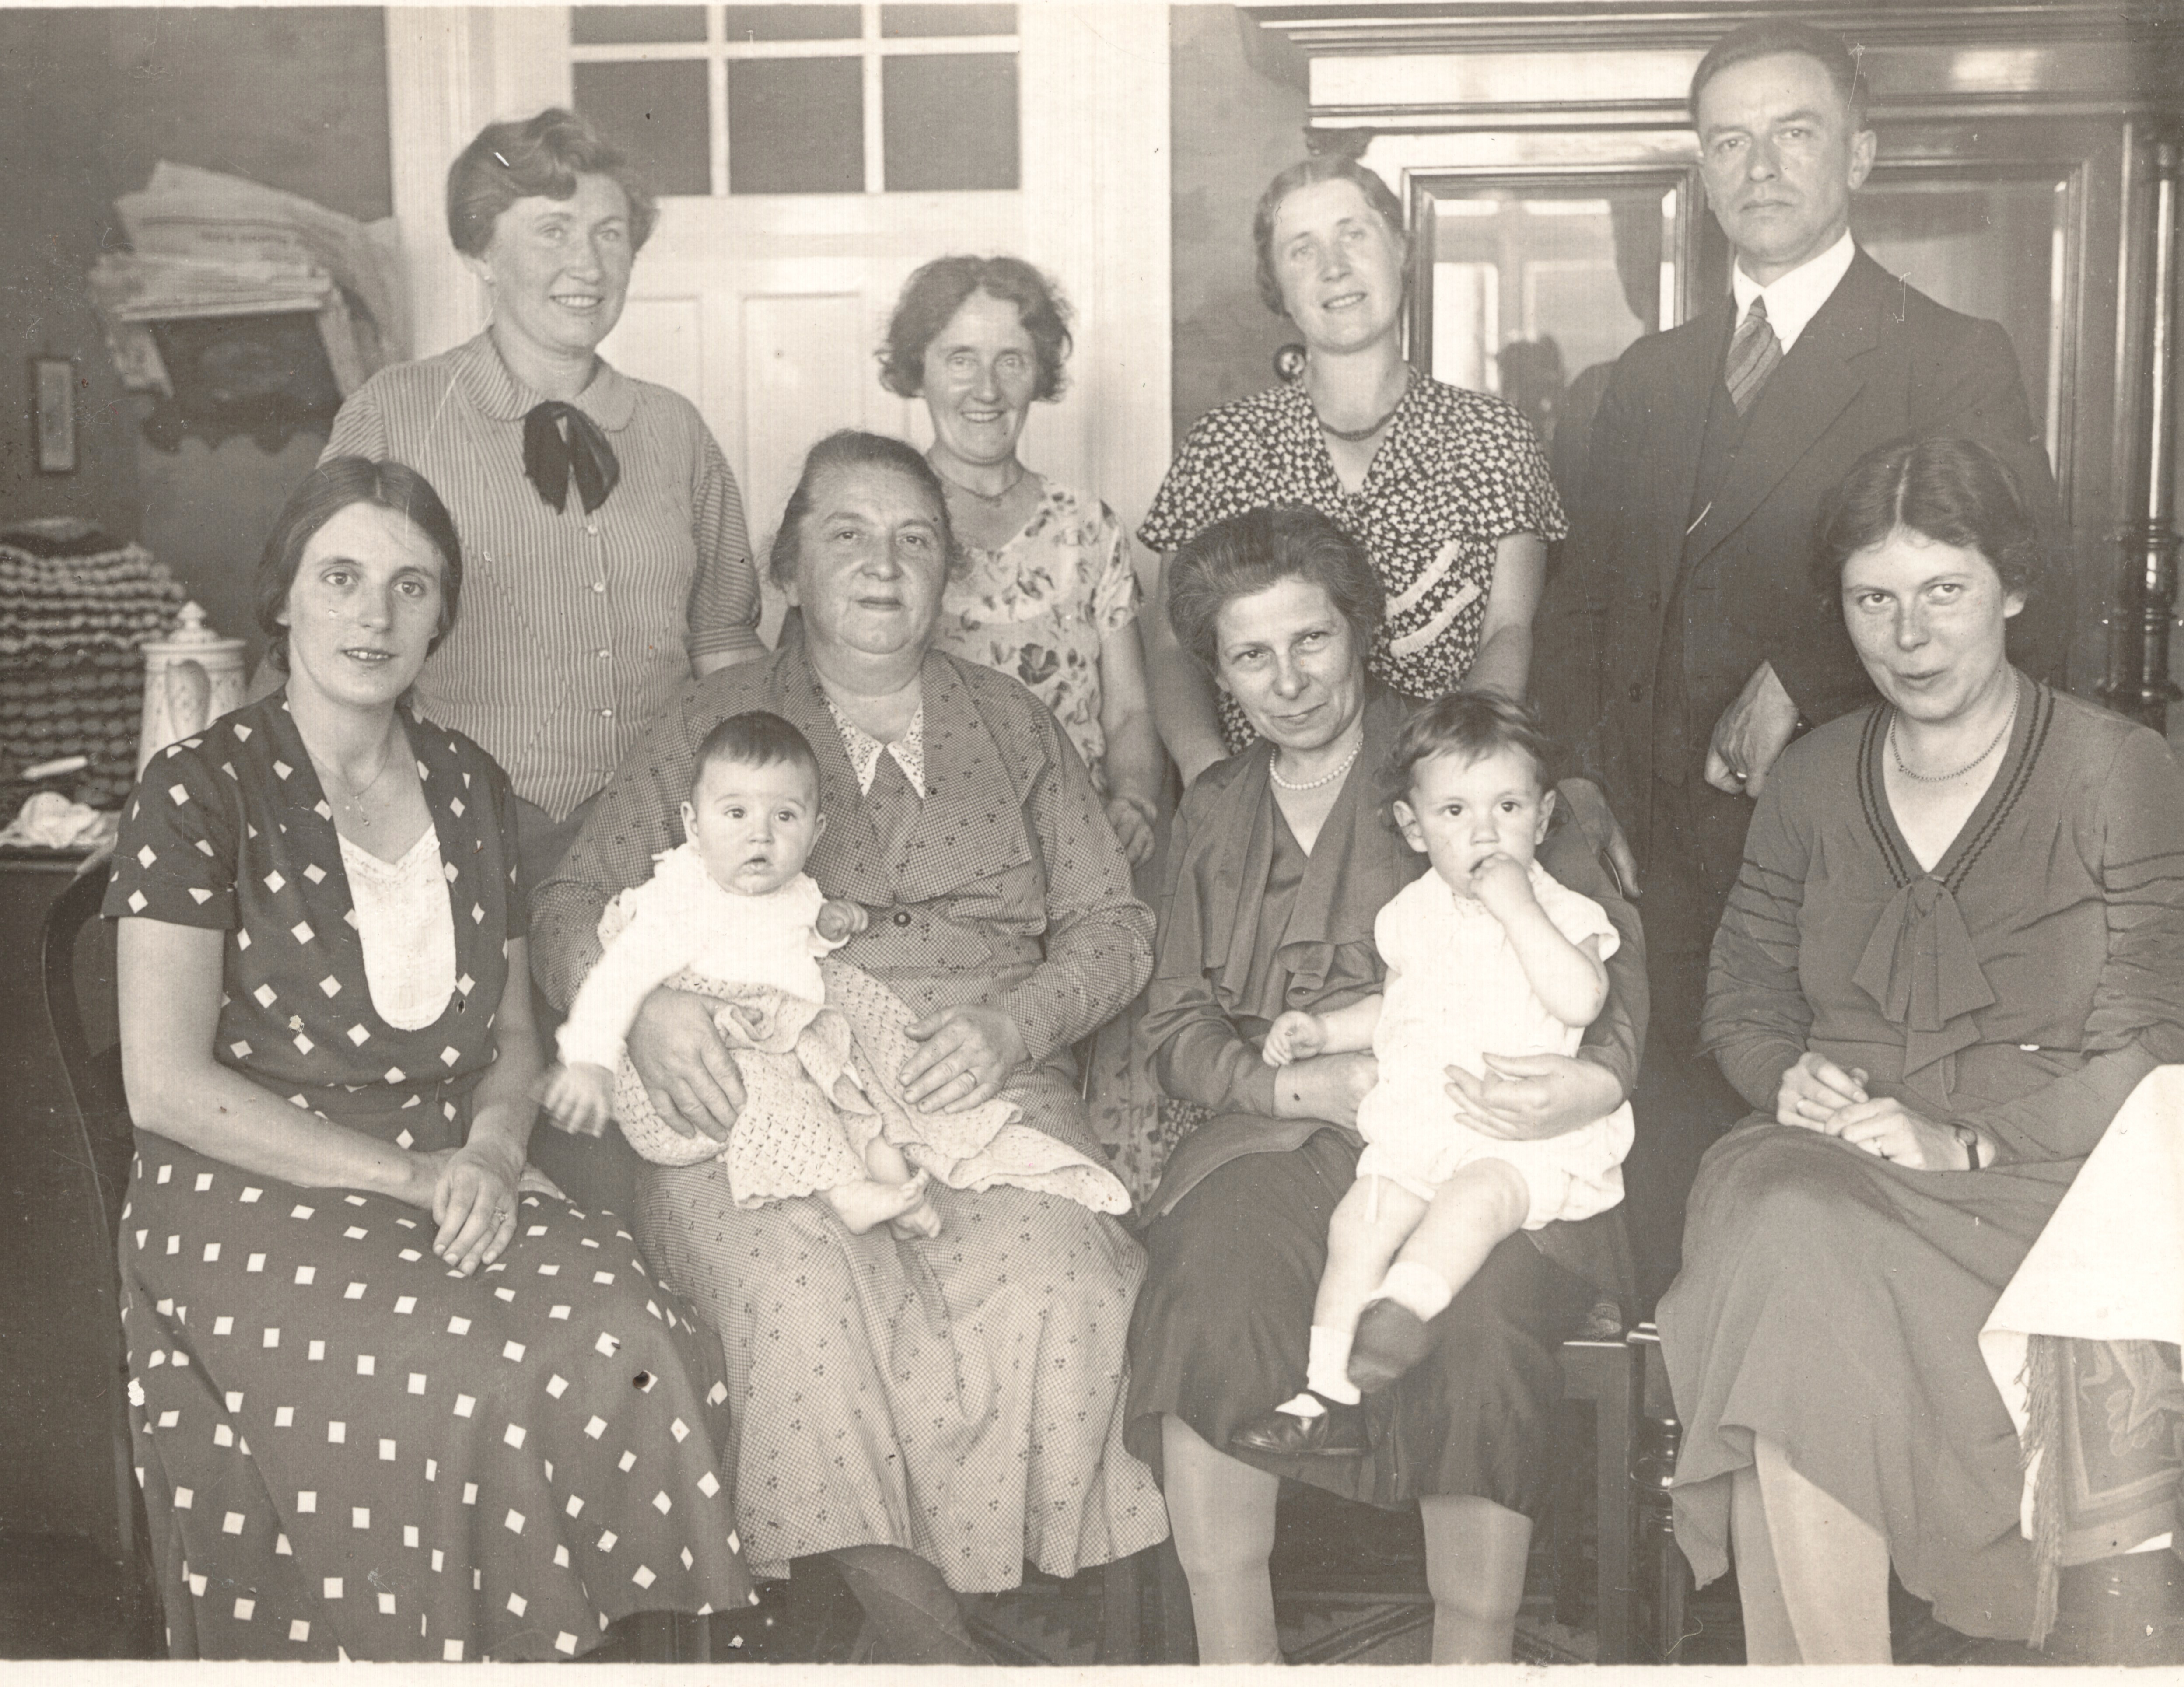 The young family of my grandparents (my father Hans Hugenholtz b.1932 is the baby on the right, sitting on the lap of his grandmother Gretchen). The woman left on the second row is Lenie Vollers, friend of my grandmother Rose. First row left to right: daughter of frau Kanziora, baby Kanziora, Frau Kanziora, who also lived in Kornstrasse 70, Bremen, my great grandmother Gretchen with my father Hans Hugenholtz (1932-2018) on her lap. Picture taken in Bremen, 1933